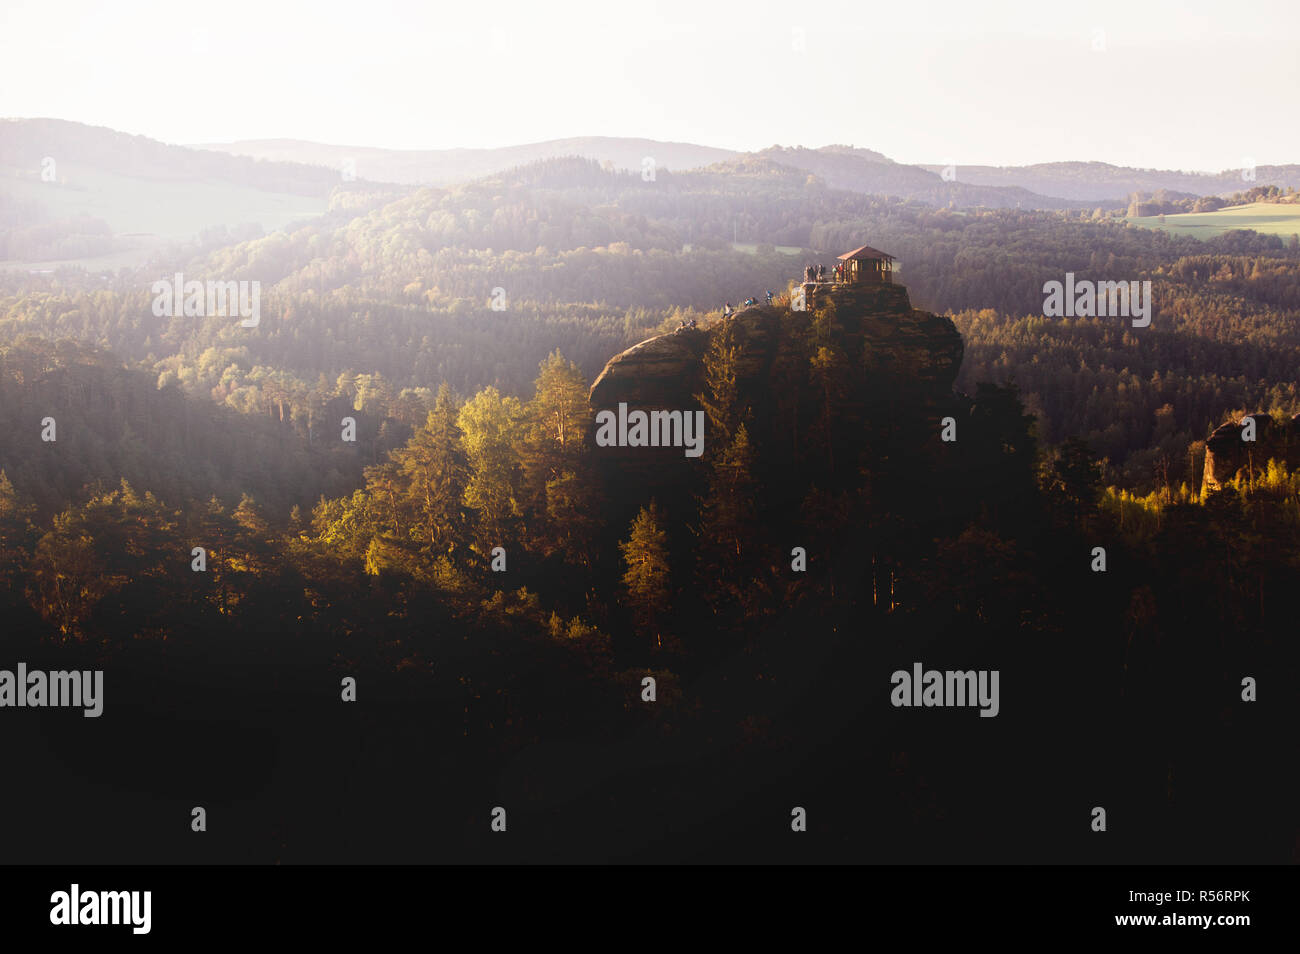 View of the Mariina Rock at sunrise. Touristy Significant Viewpoint in Bohemian Schwitzerland National Park, Czech Republic. Stock Photo